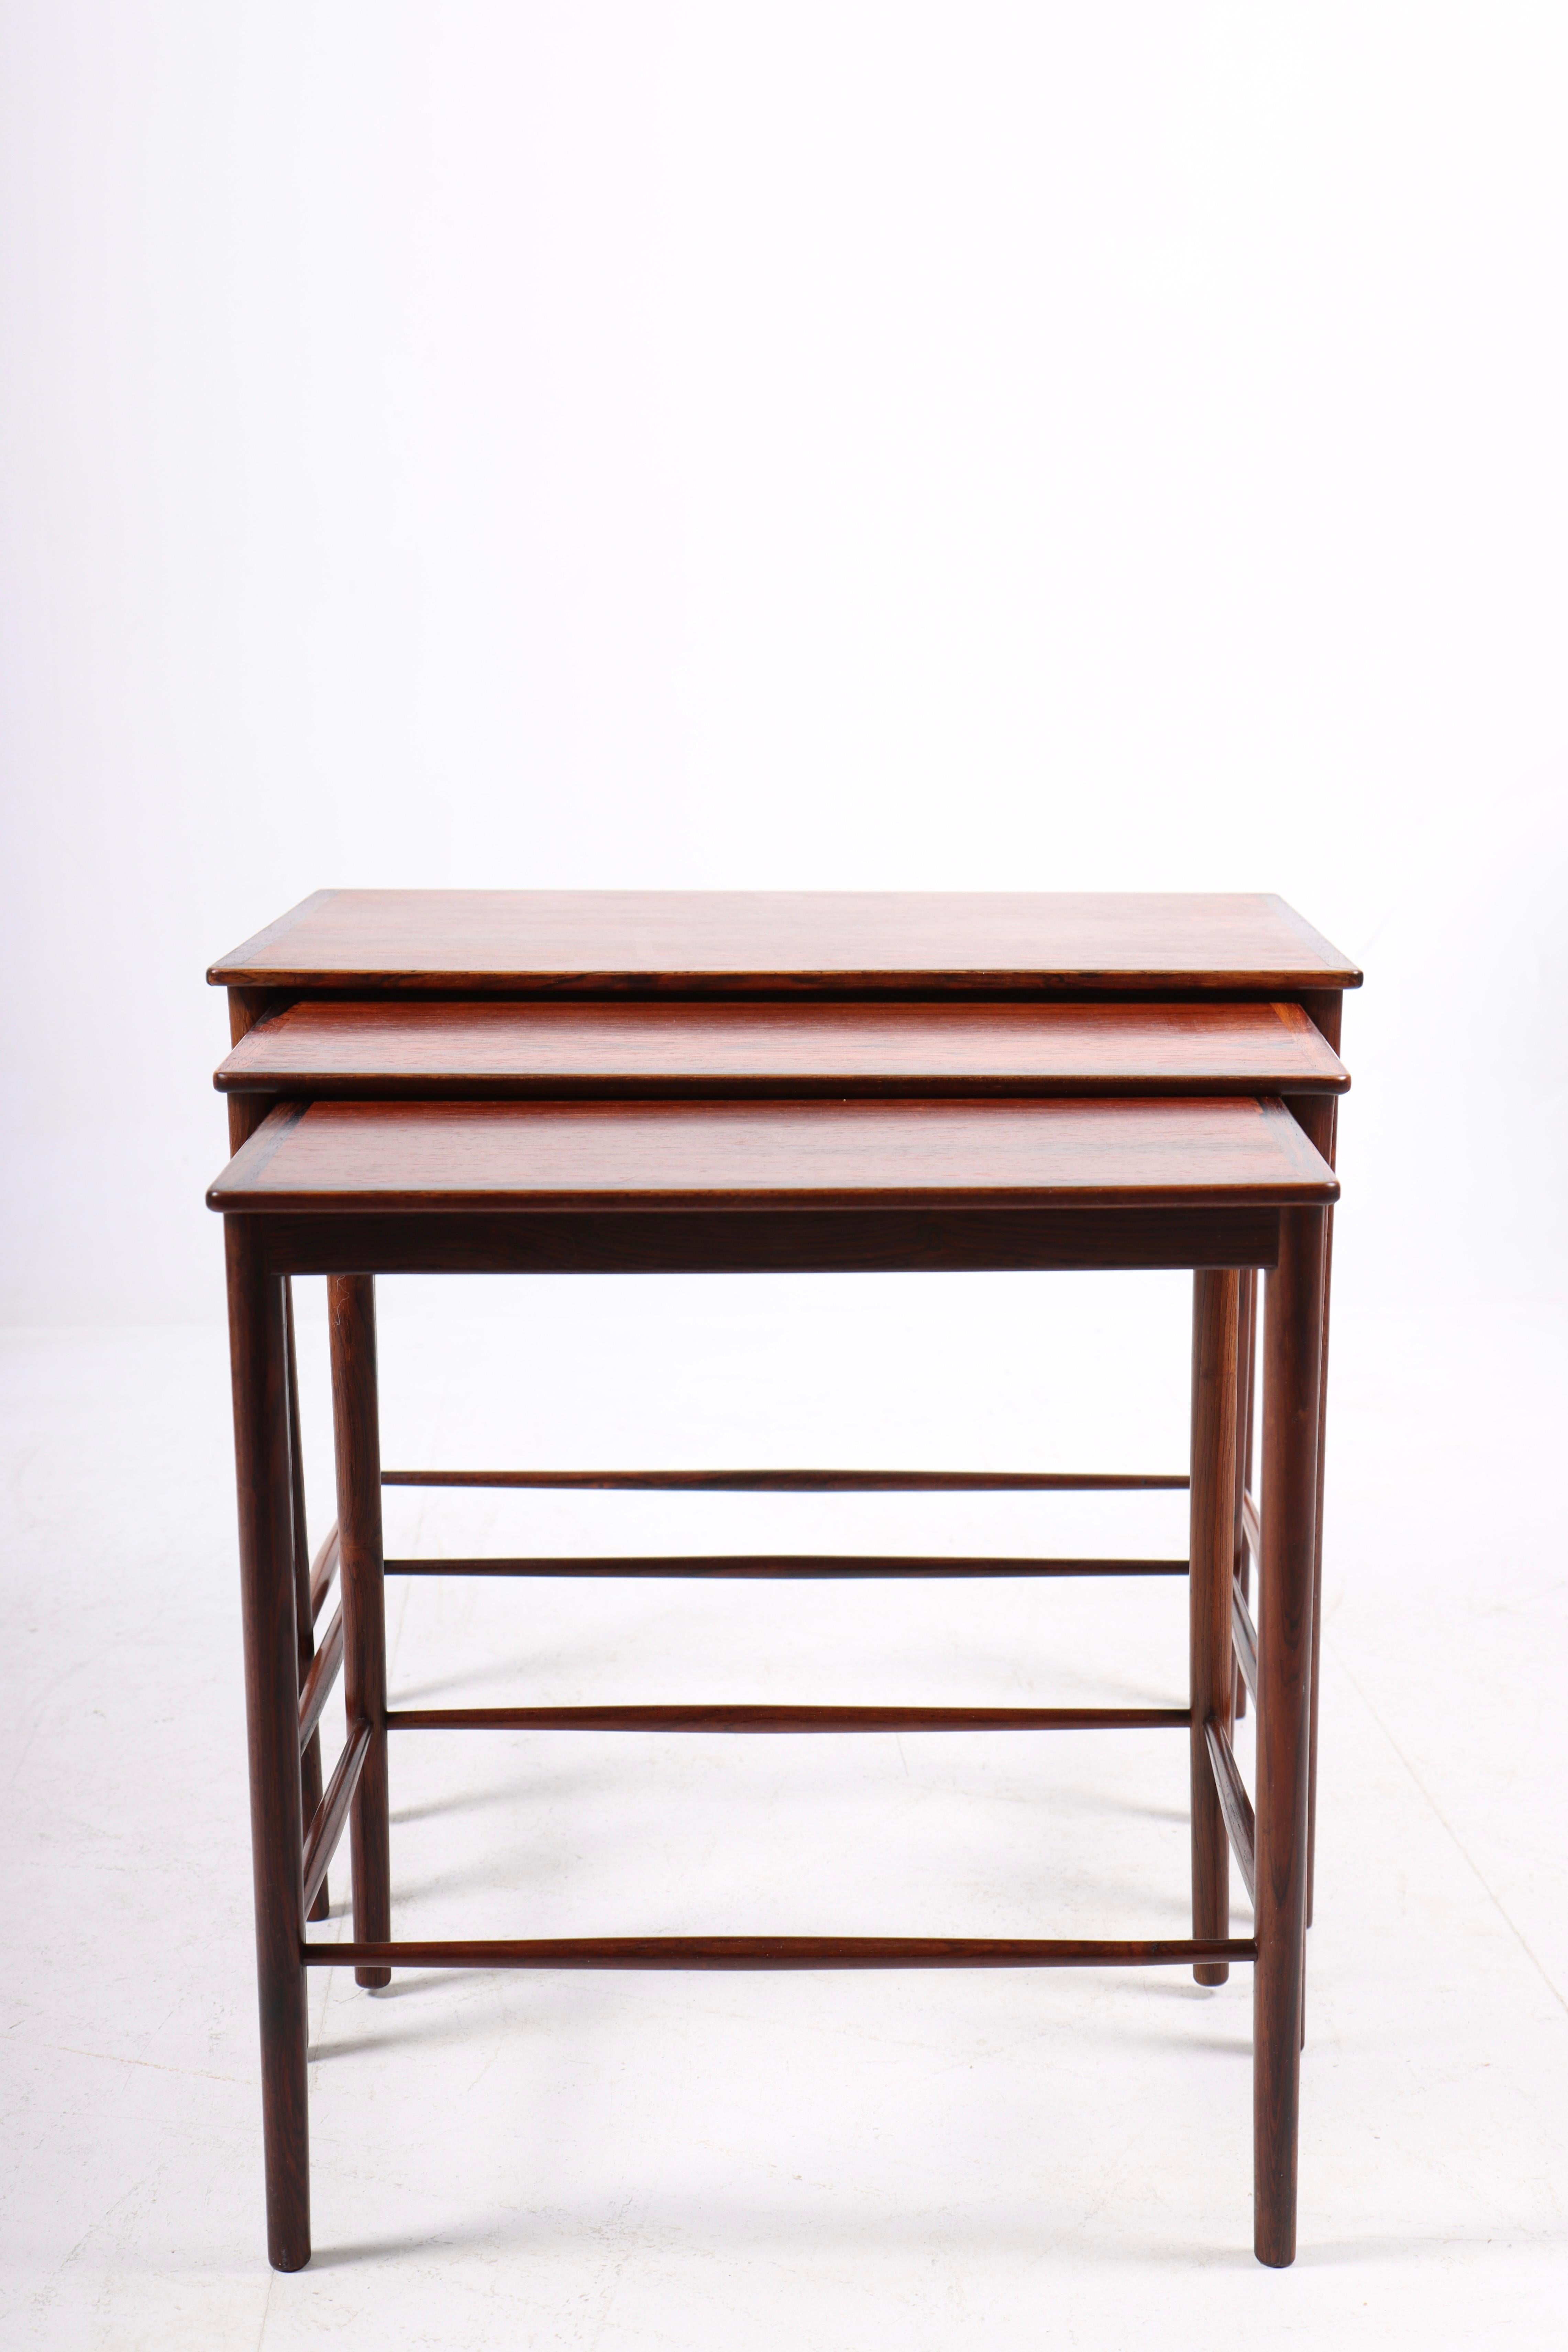 Scandinavian Modern Midcentury Nesting Table in Rosewood Designed by Grethe Jalk, 1950s For Sale